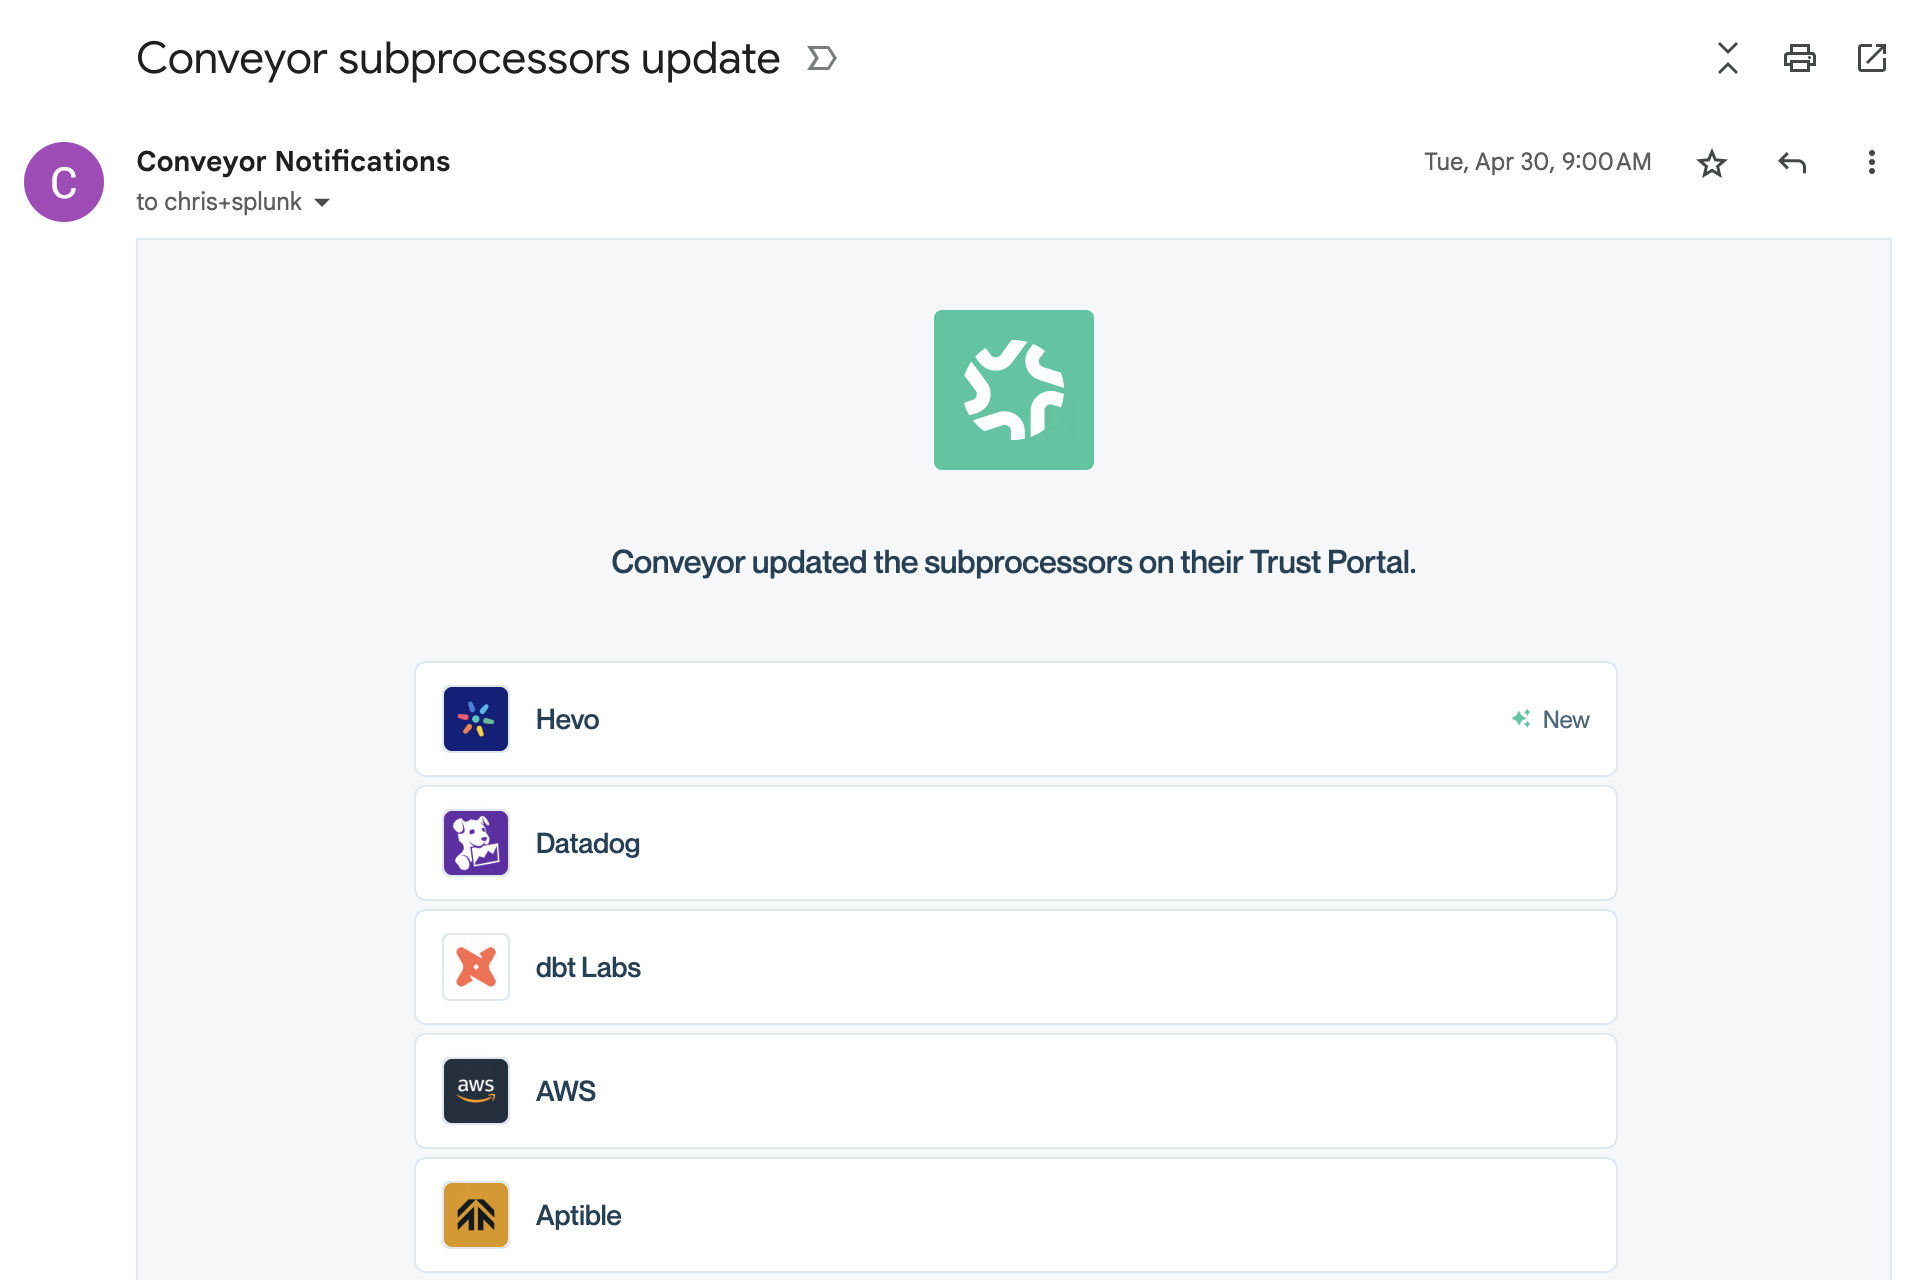 Example of a Subprocessor Update email